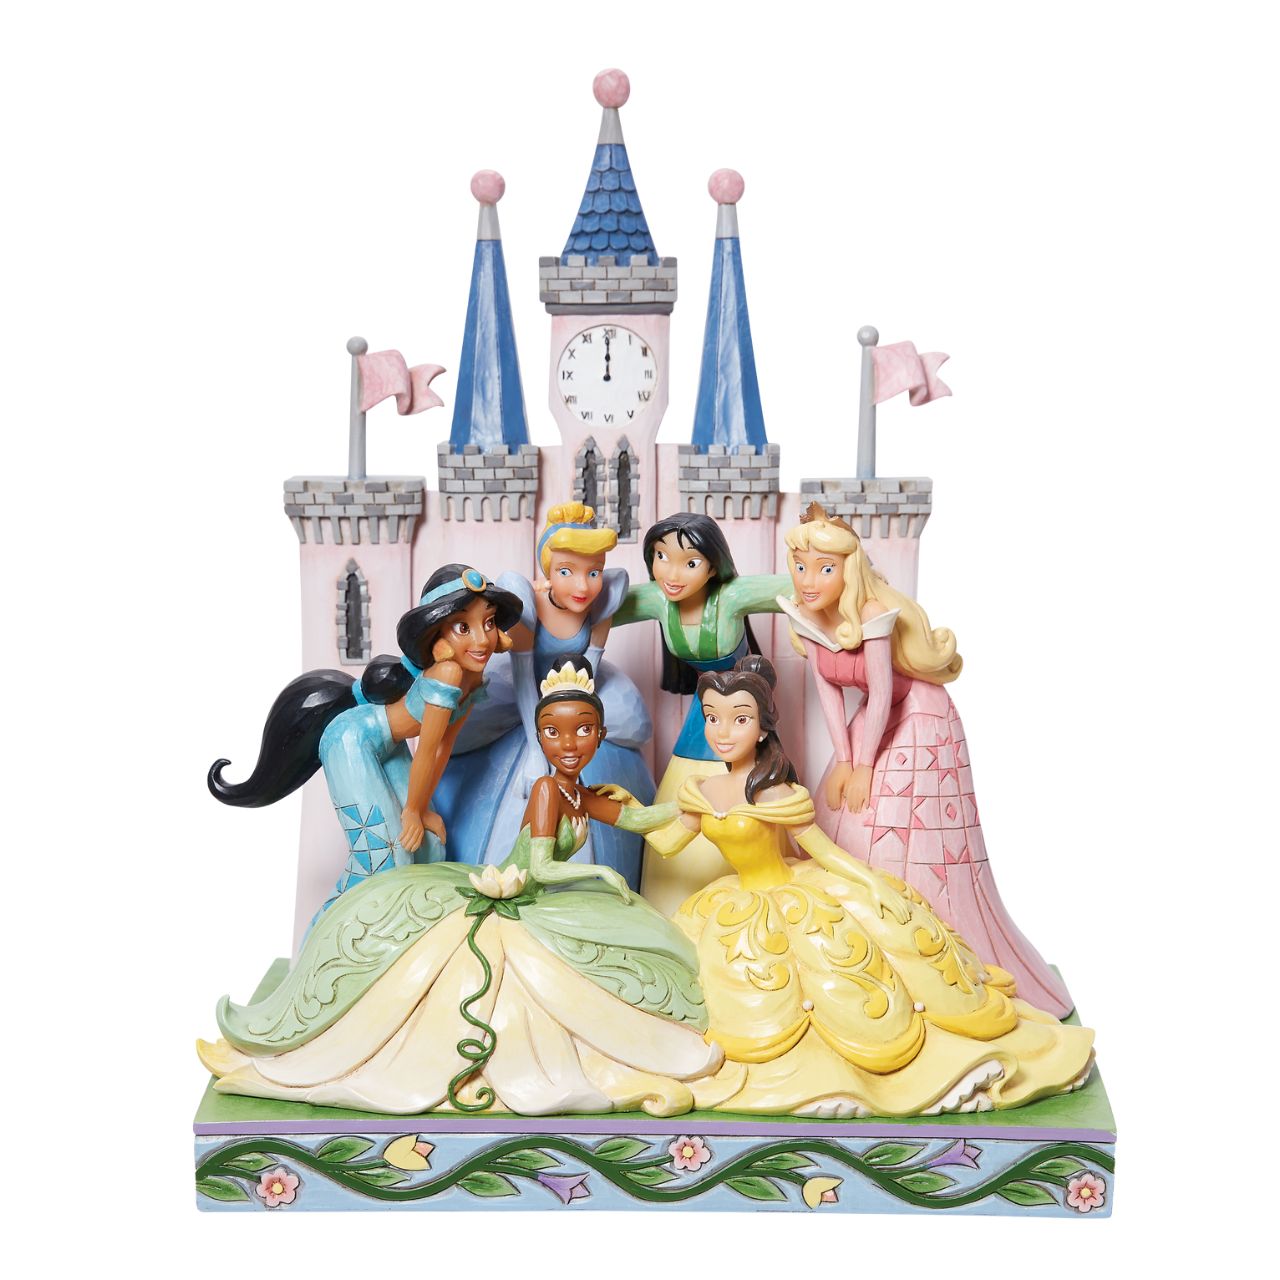 Featuring beloved Disney Princesses such as Jasmine, Belle, Tiana, Cinderella, Mulan and Aurora, this is the perfect gift for any super-fan. Designed by award winning artist Jim Shore, hand crafted using high quality cast stone and hand painted.